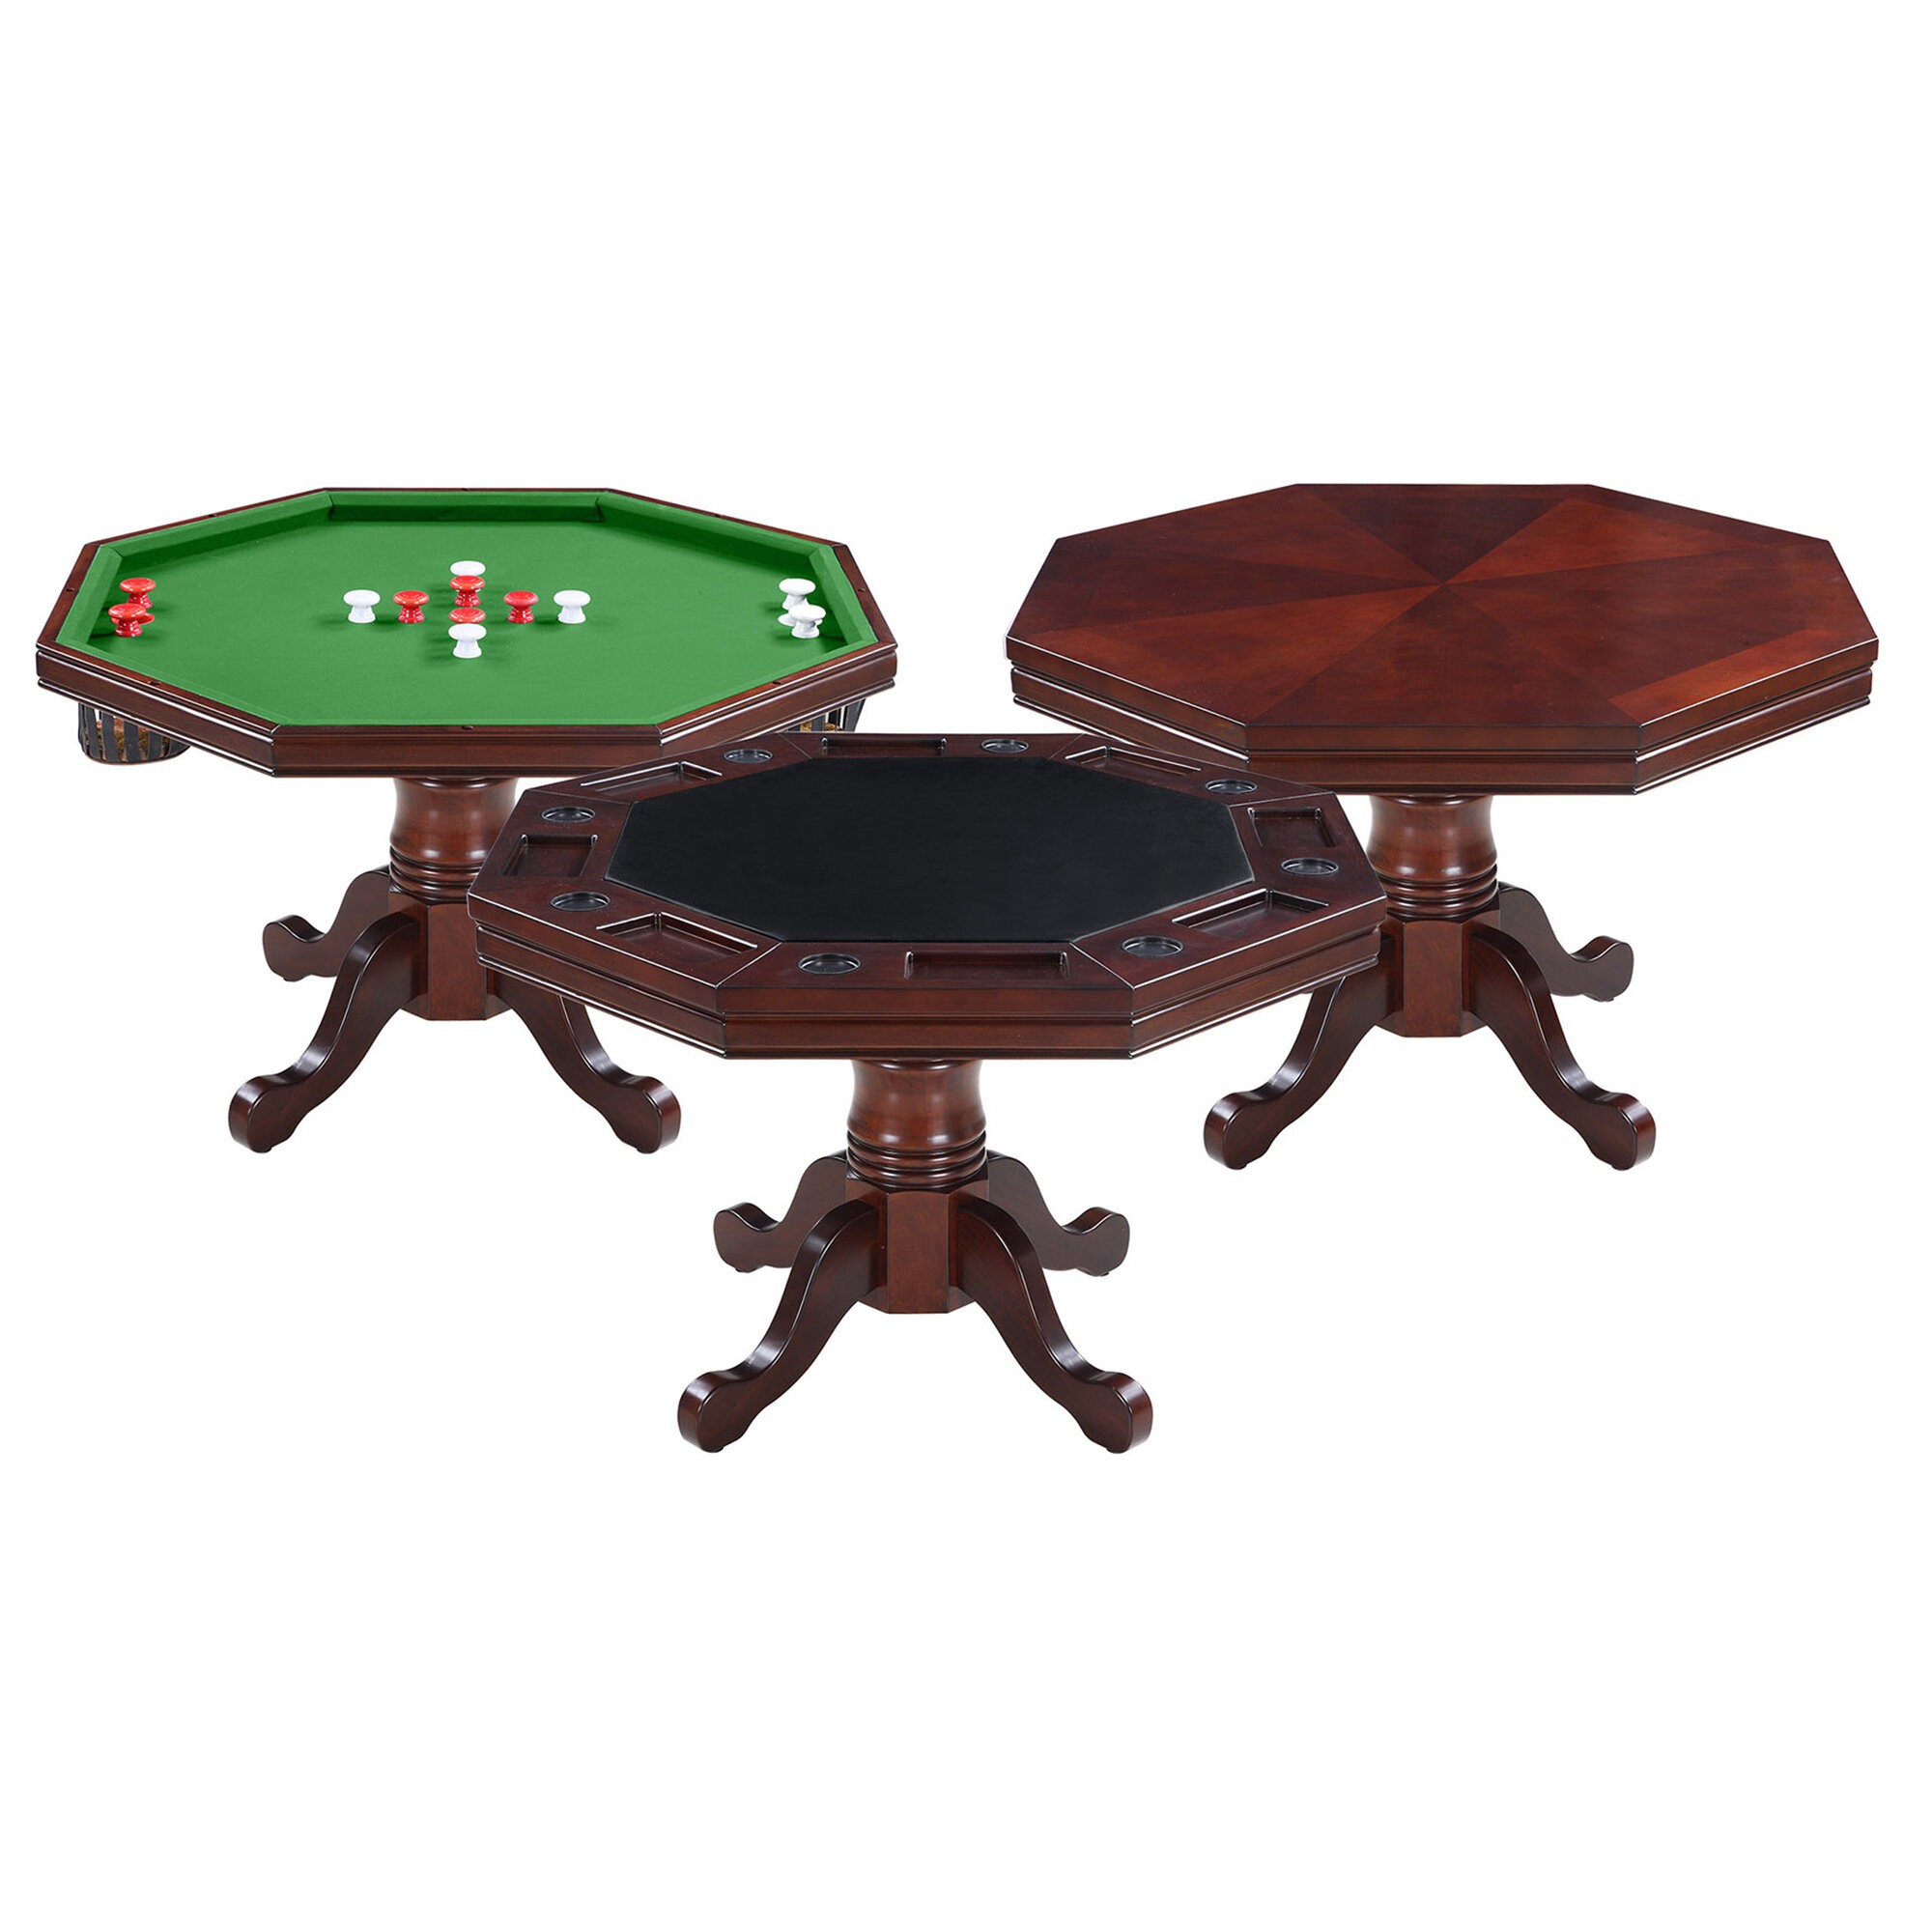 Aap poker table with chairs 2 in 1 set come